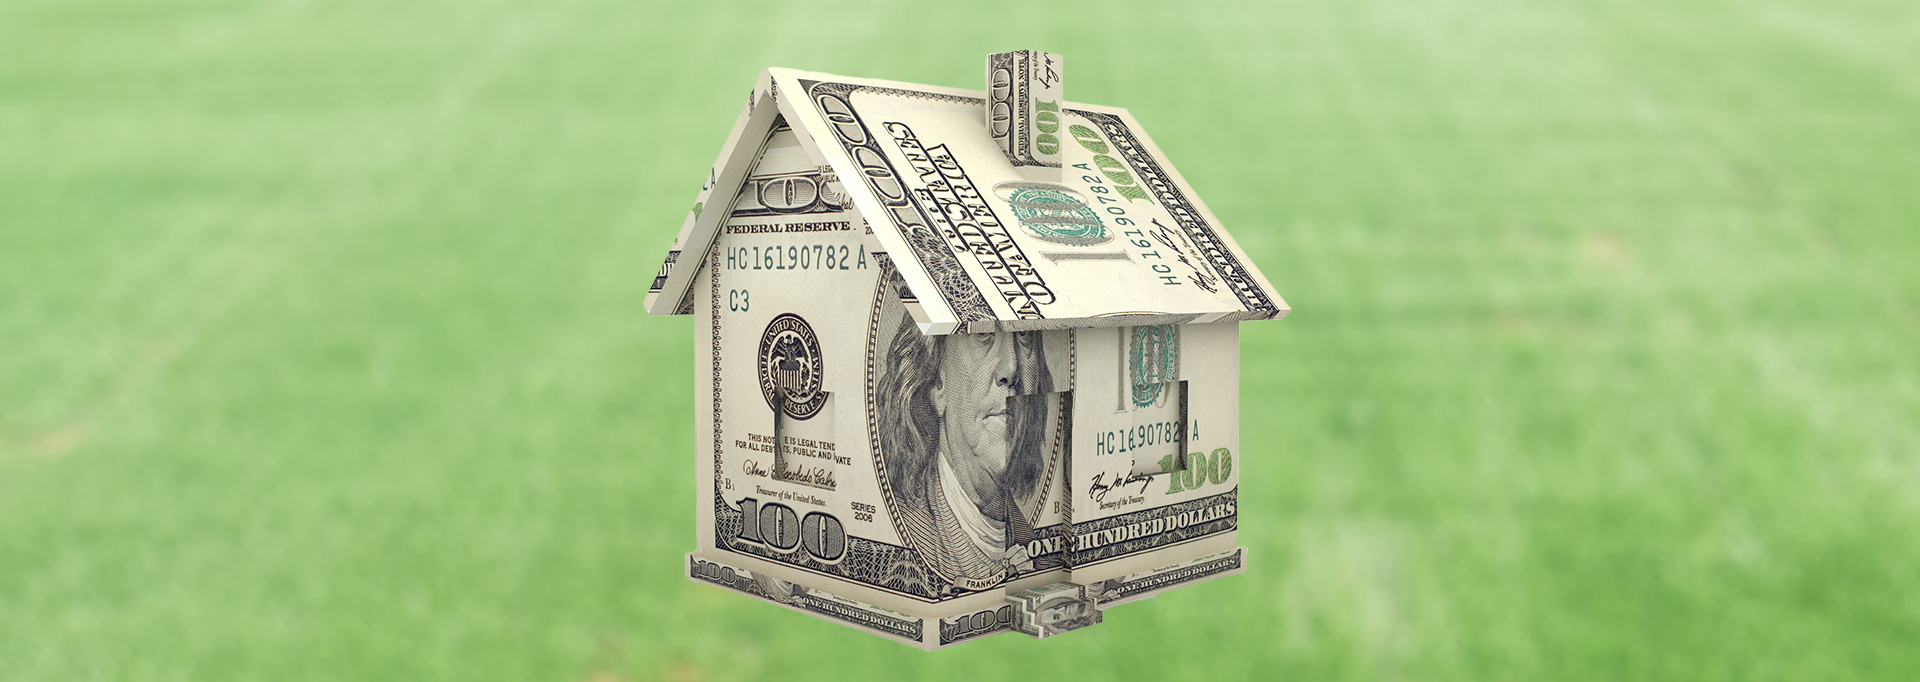 house made of money on green grass background